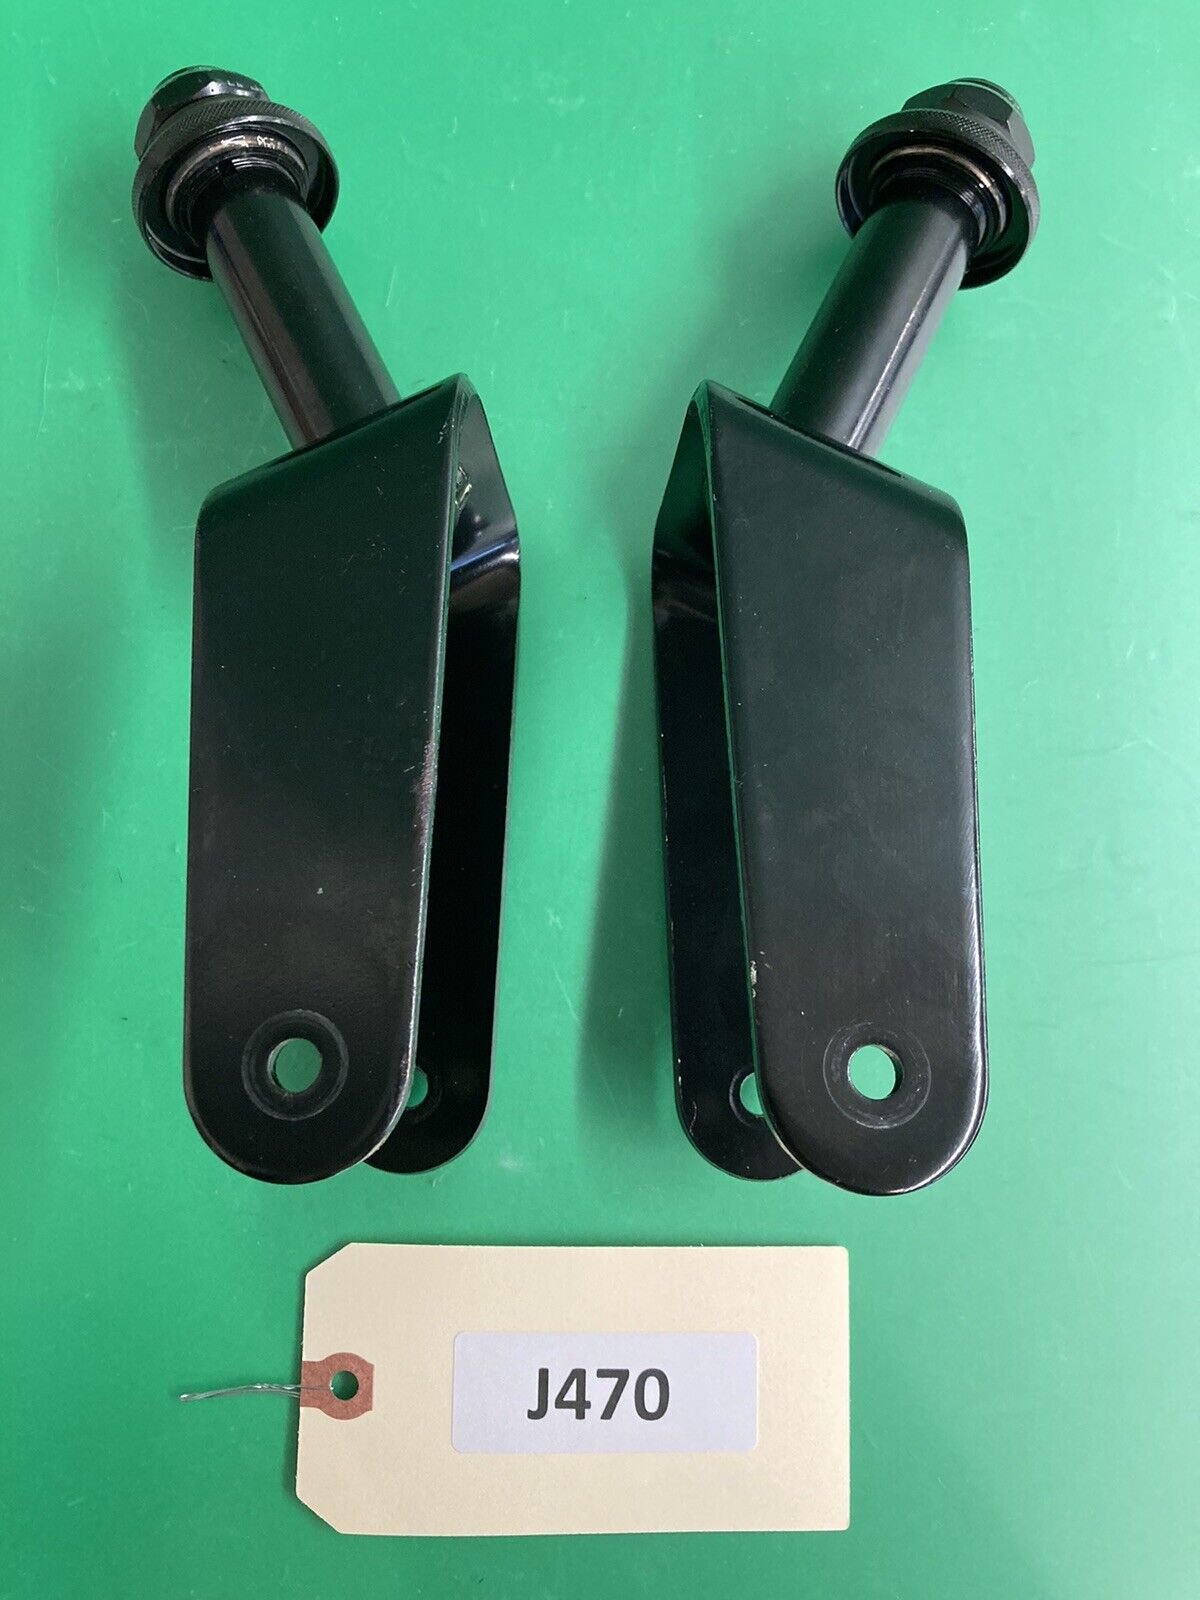 SET OF 2 Rear Caster Forks for the C.T.M. HS-2800 Power Wheelchair #J470